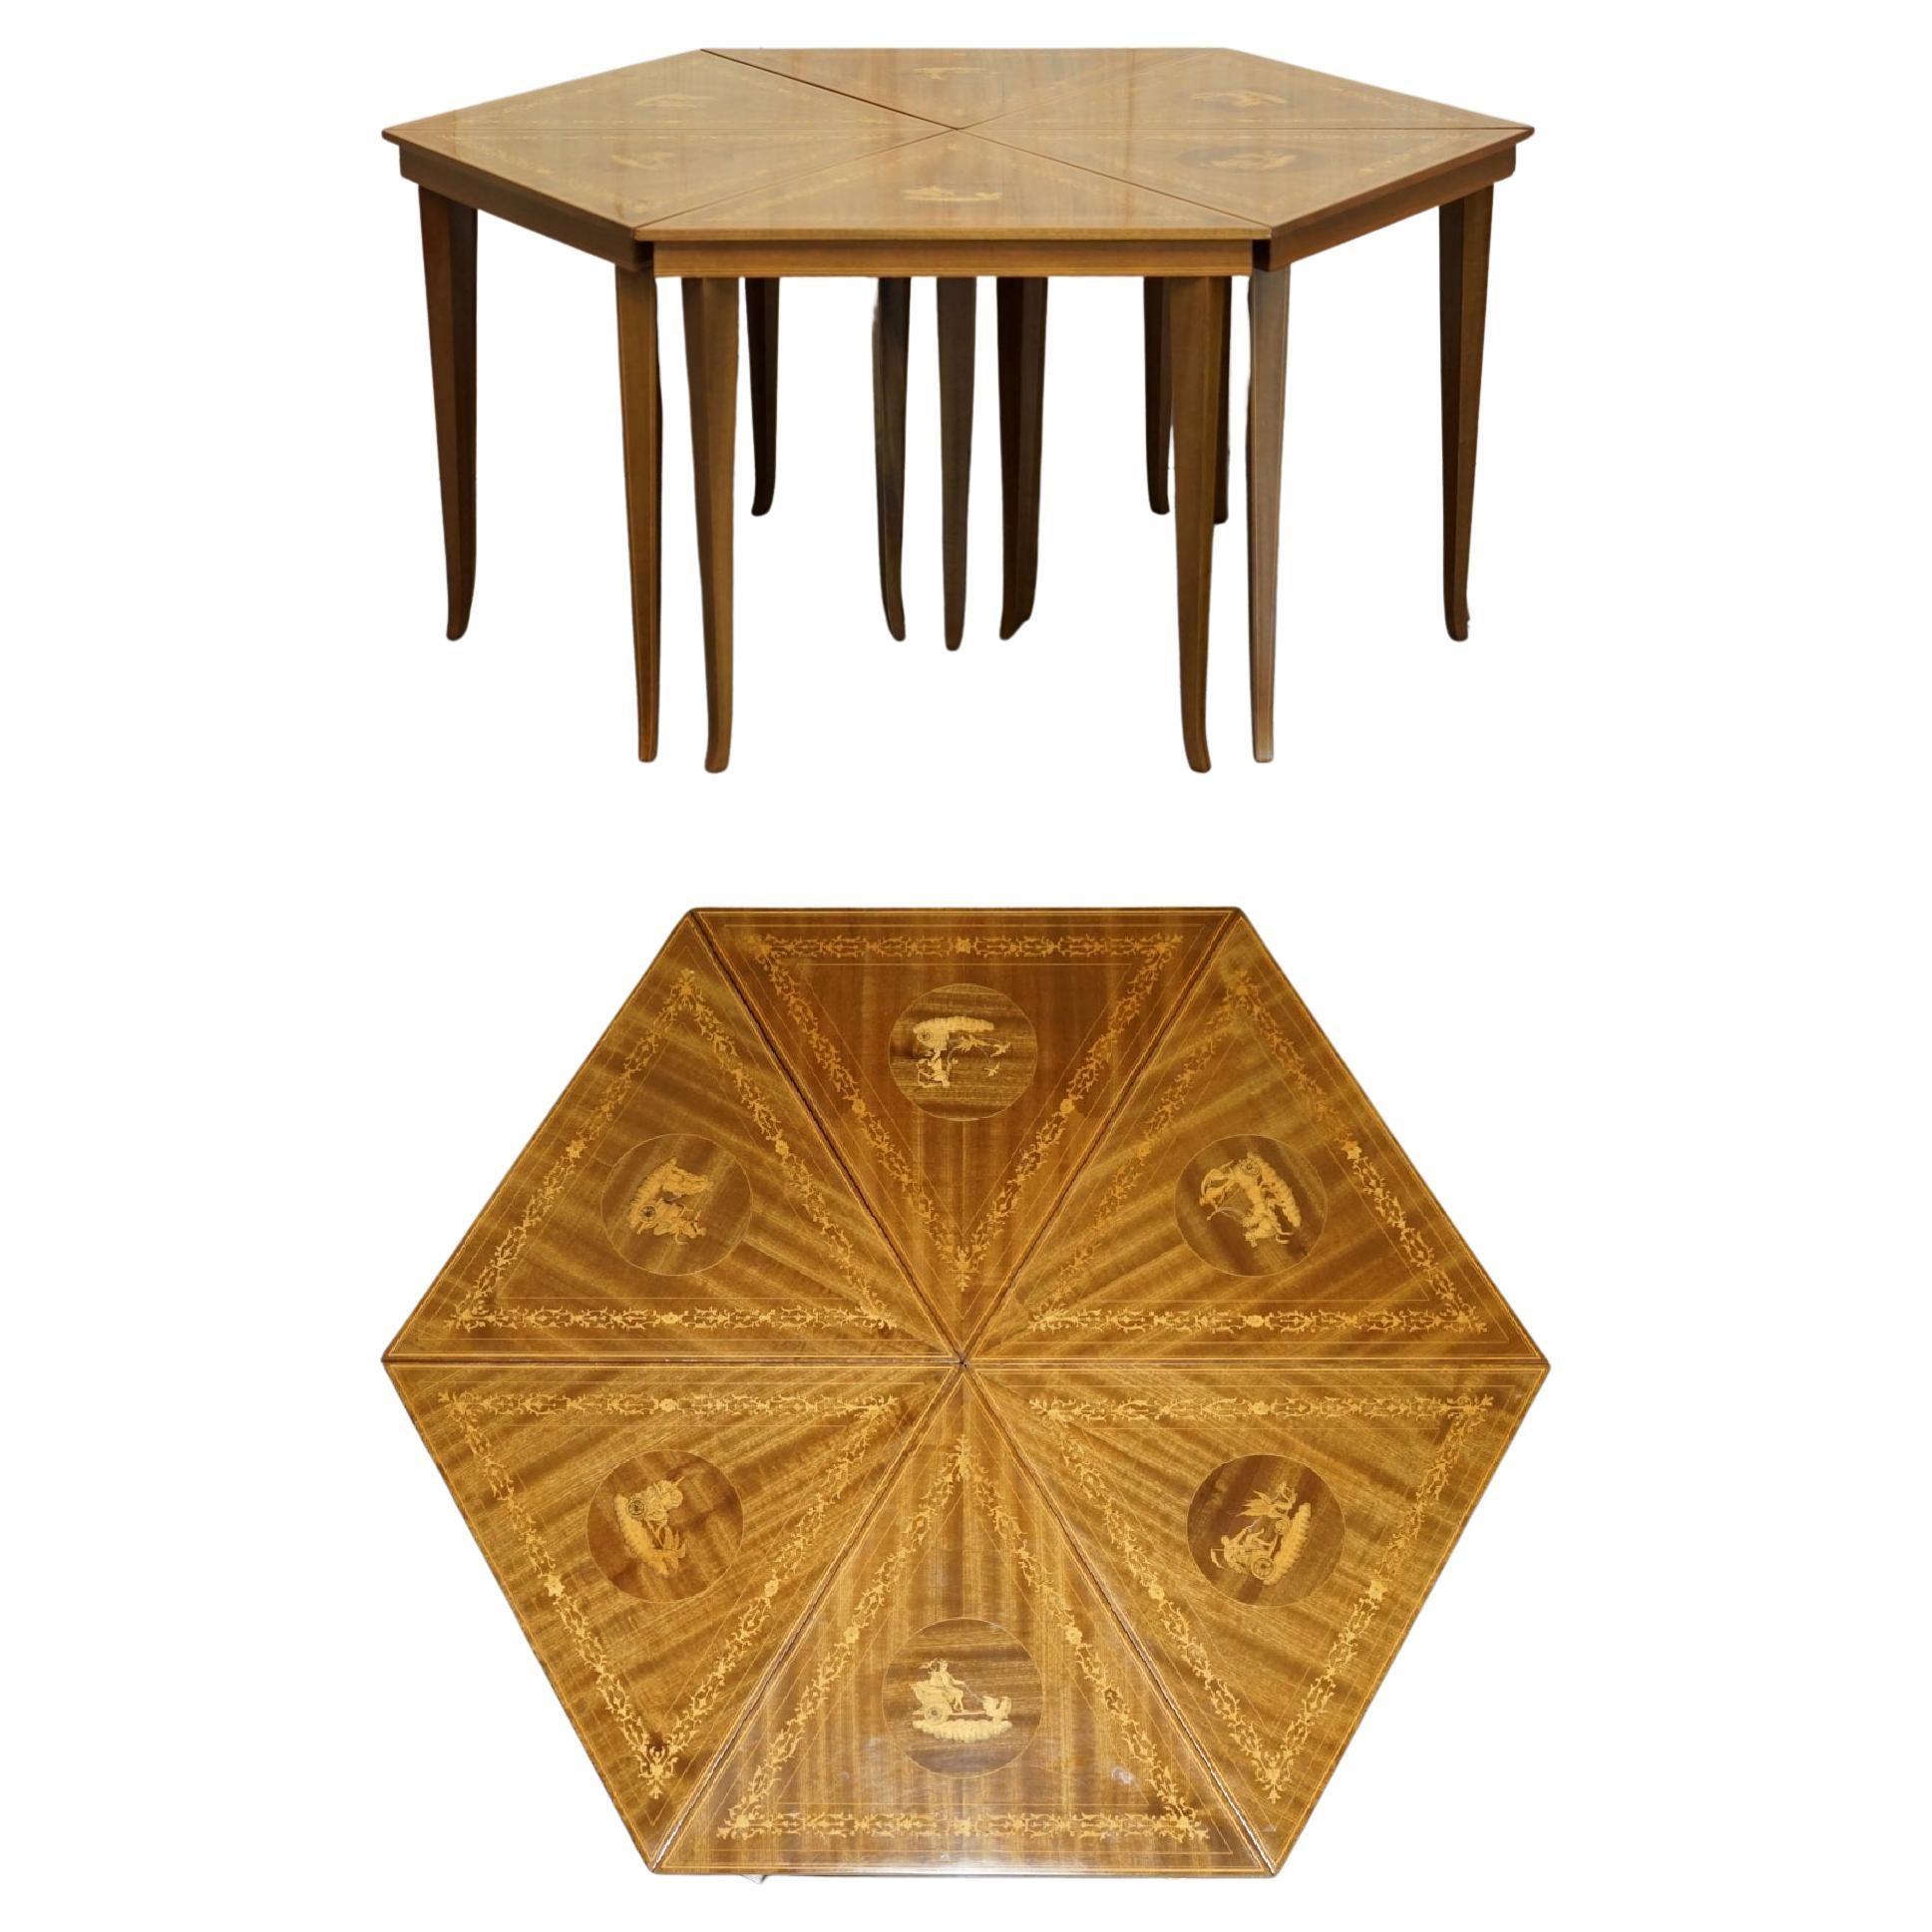 Lovely circa 1950's Vintage Italian Marquetry Inlaid Nest of Six Triangle Tables For Sale